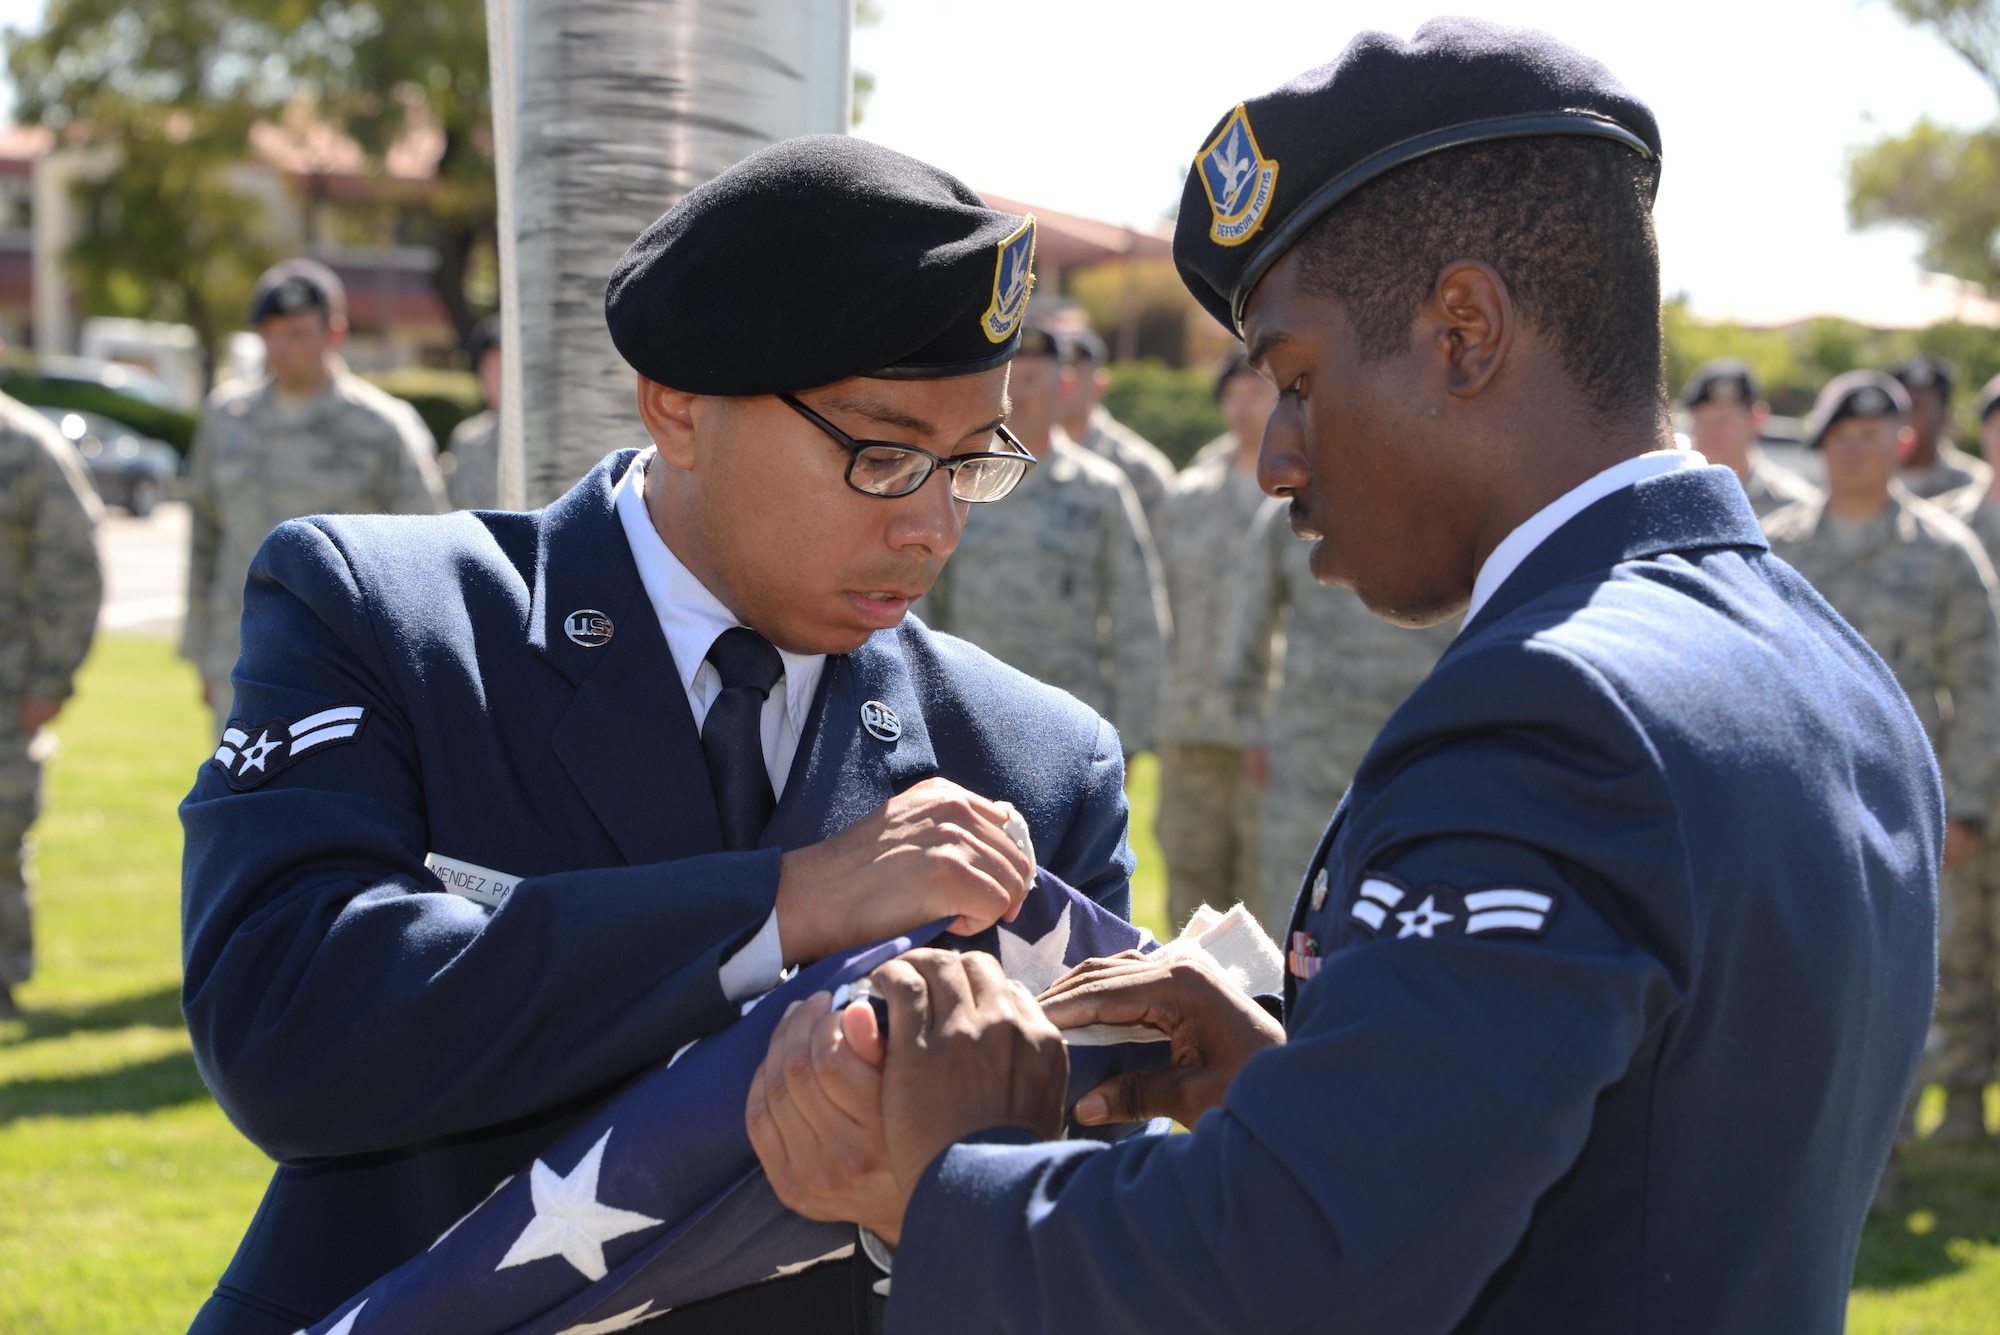 Airmen assigned to the 60th Security Forces Squadron at Travis Air Force Base, Calif., fold the American flag during a retreat ceremony at the base May 18, 2017, to close Police Week. The event featured a formation of security forces Airmen and the reading of the names of fallen defenders. (U.S. Air Force photo/Tech. Sgt. James Hodgman)